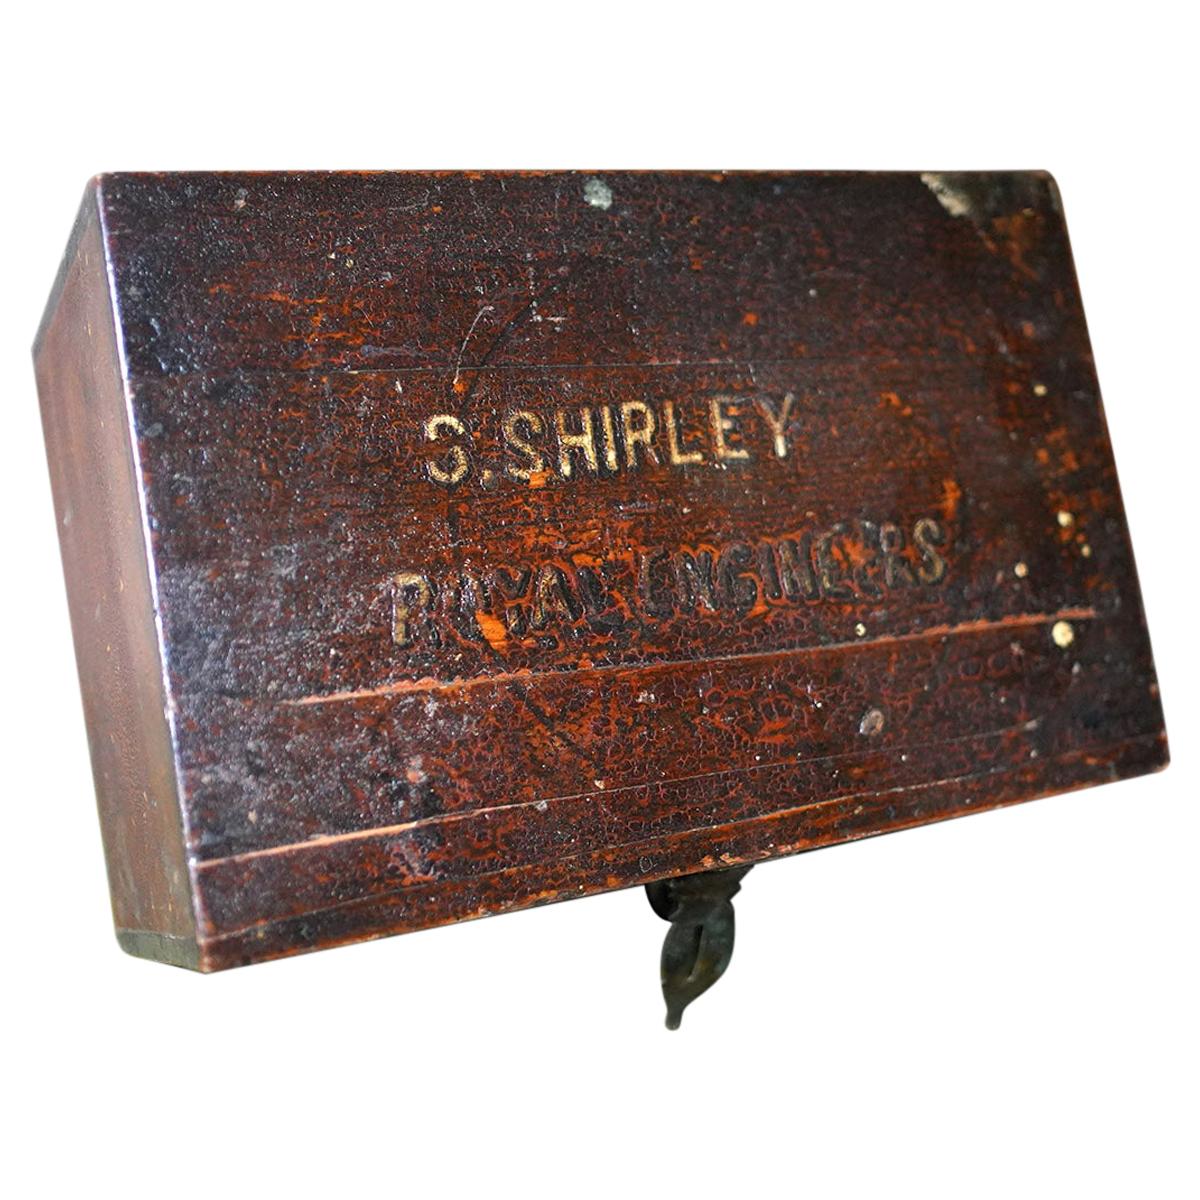 Boer War Period Pine Officer’s Box & Artefacts, S.Shirley Royal Engineers c.1900